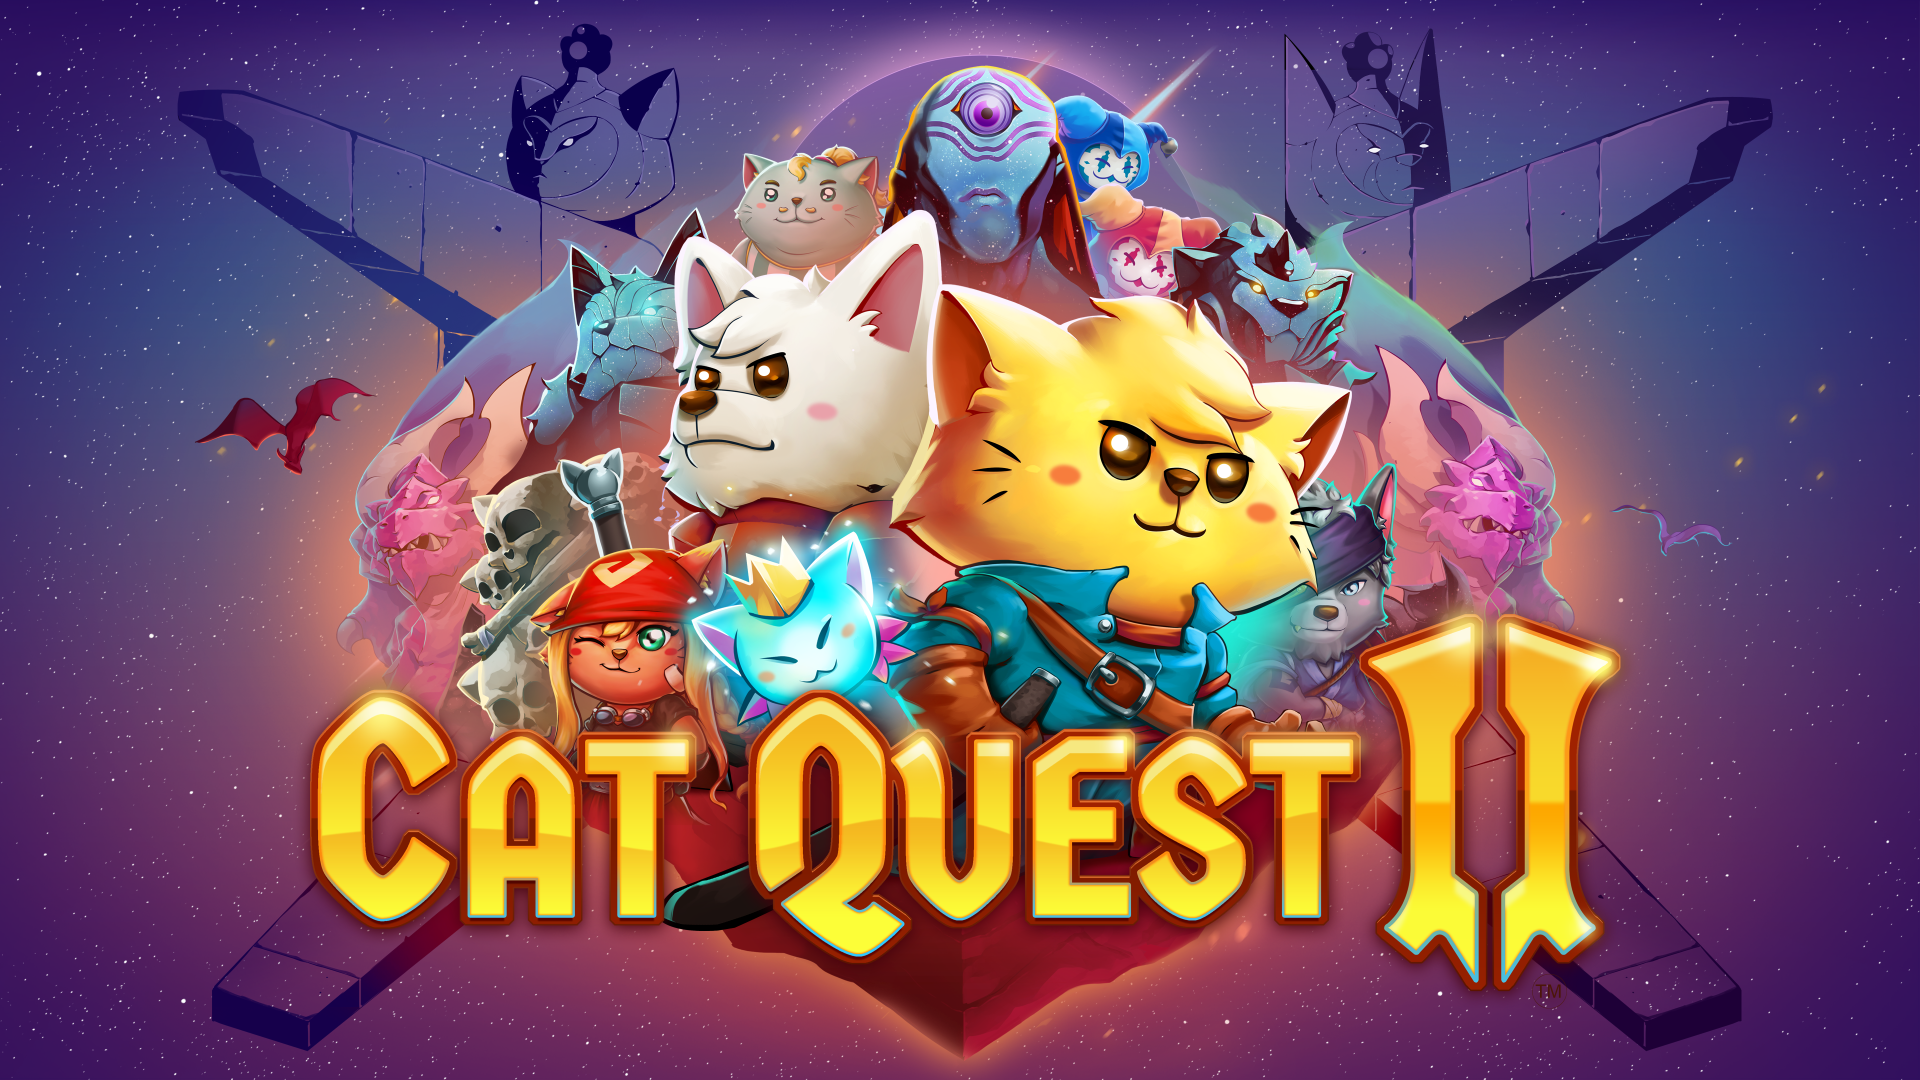 PR - Cat Quest II: Free update adds New Game+ and more to the adorable Catventure